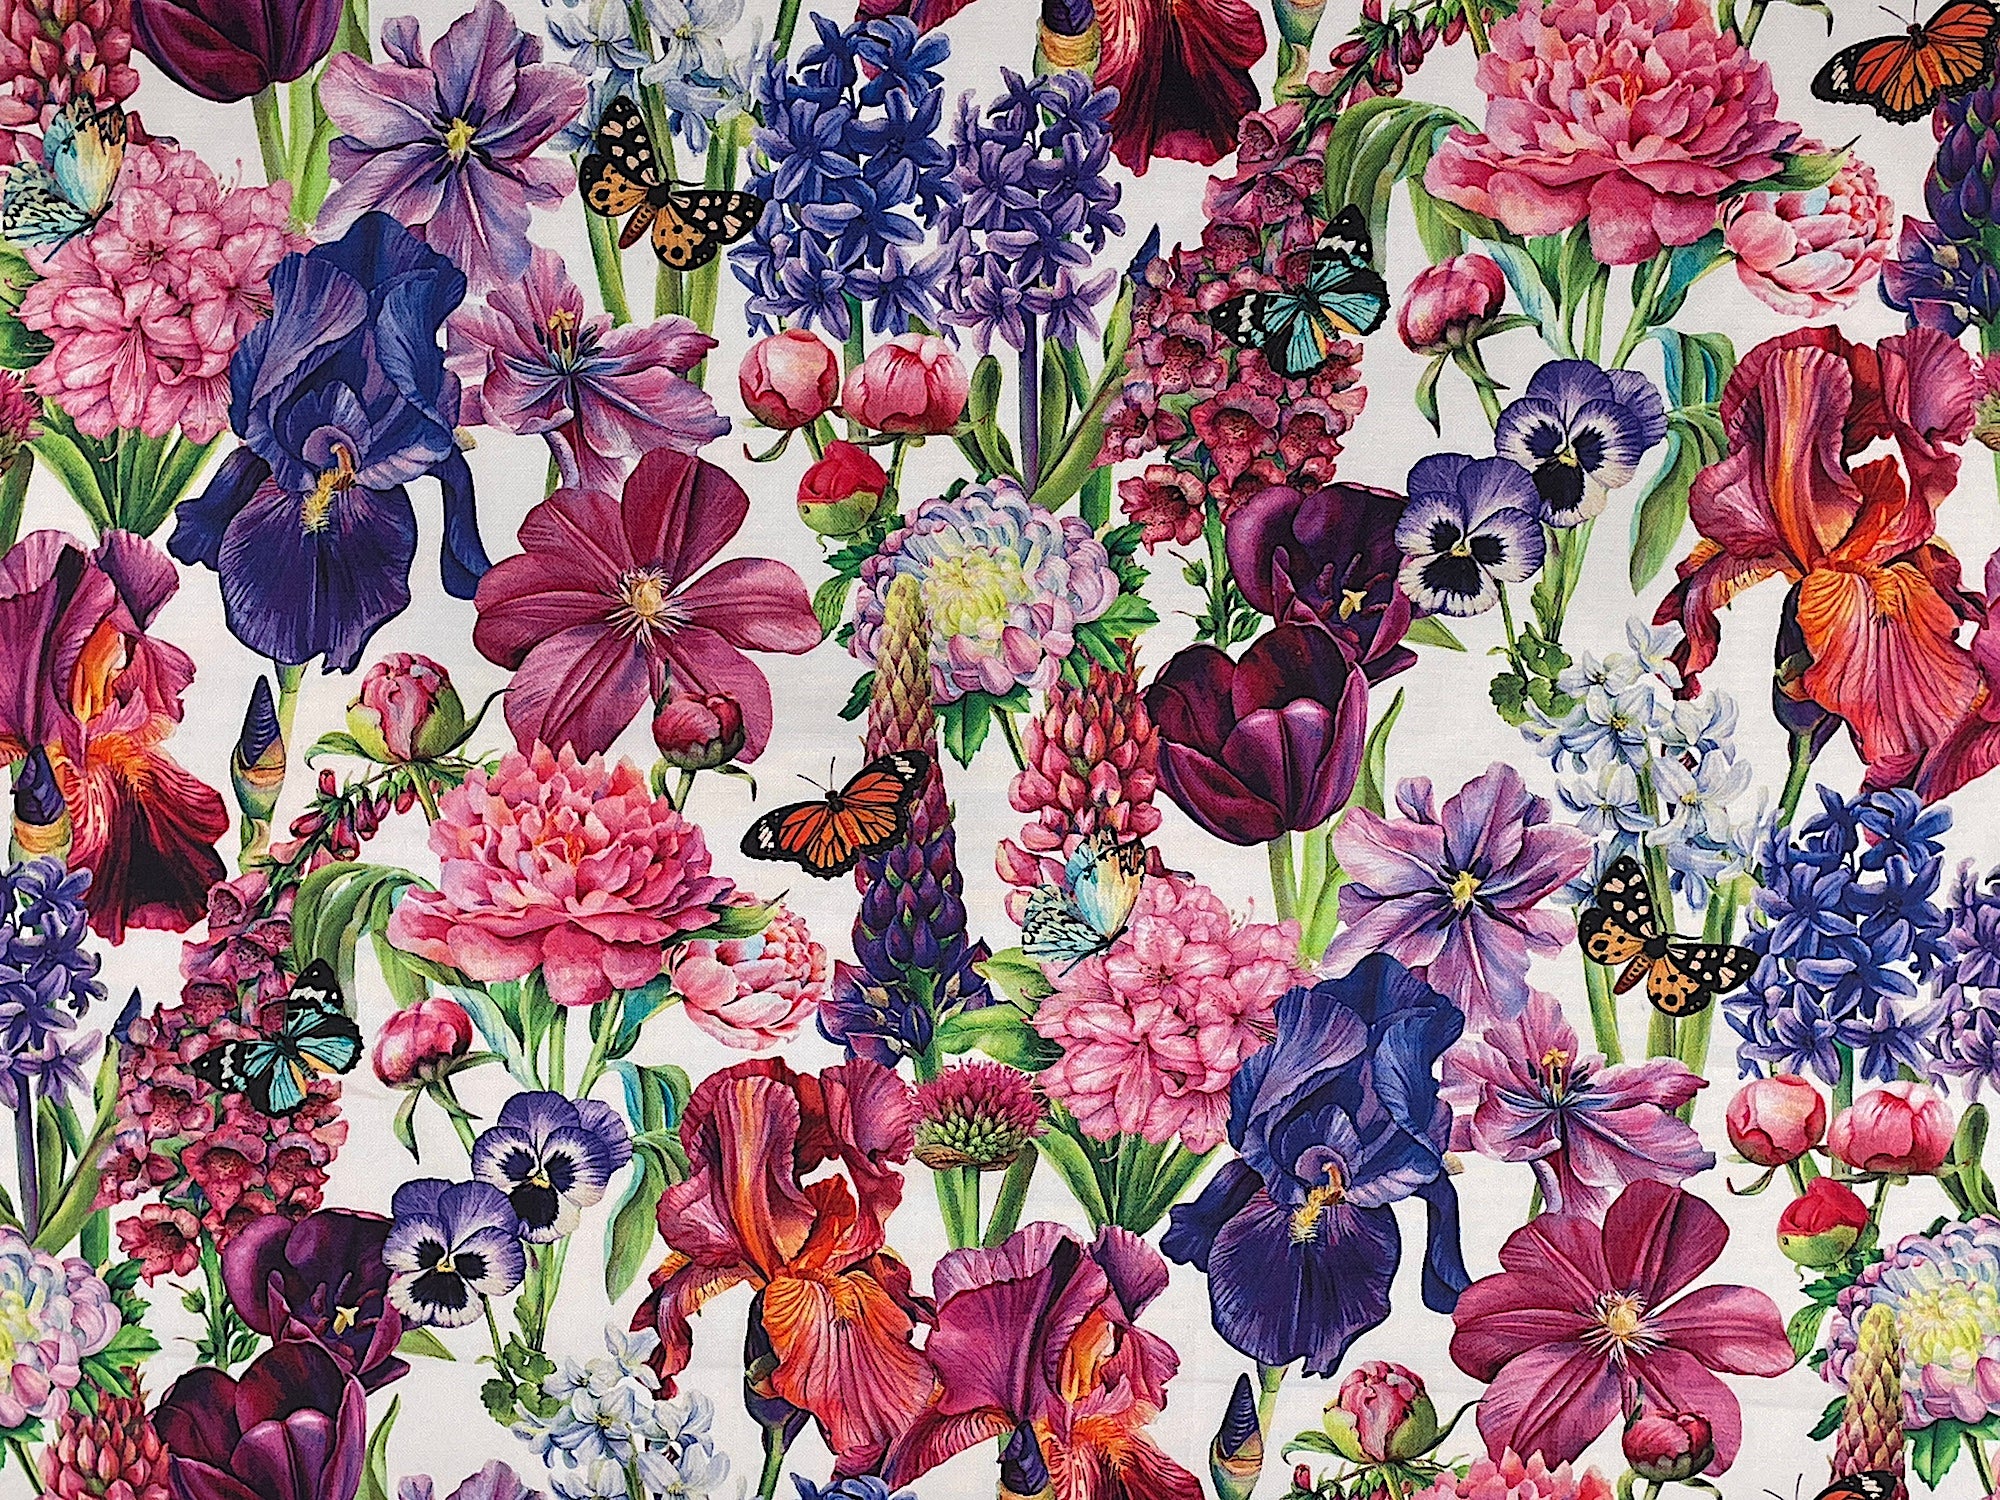 From Northcott Fabrics this white&nbsp; fabric is covered with snapdragons, iris, peonies, tulips and other flowers.&nbsp; There are also butterflies throughout the fabric. This fabric is part of Deborah's Garden collection by Northcott Fabrics.